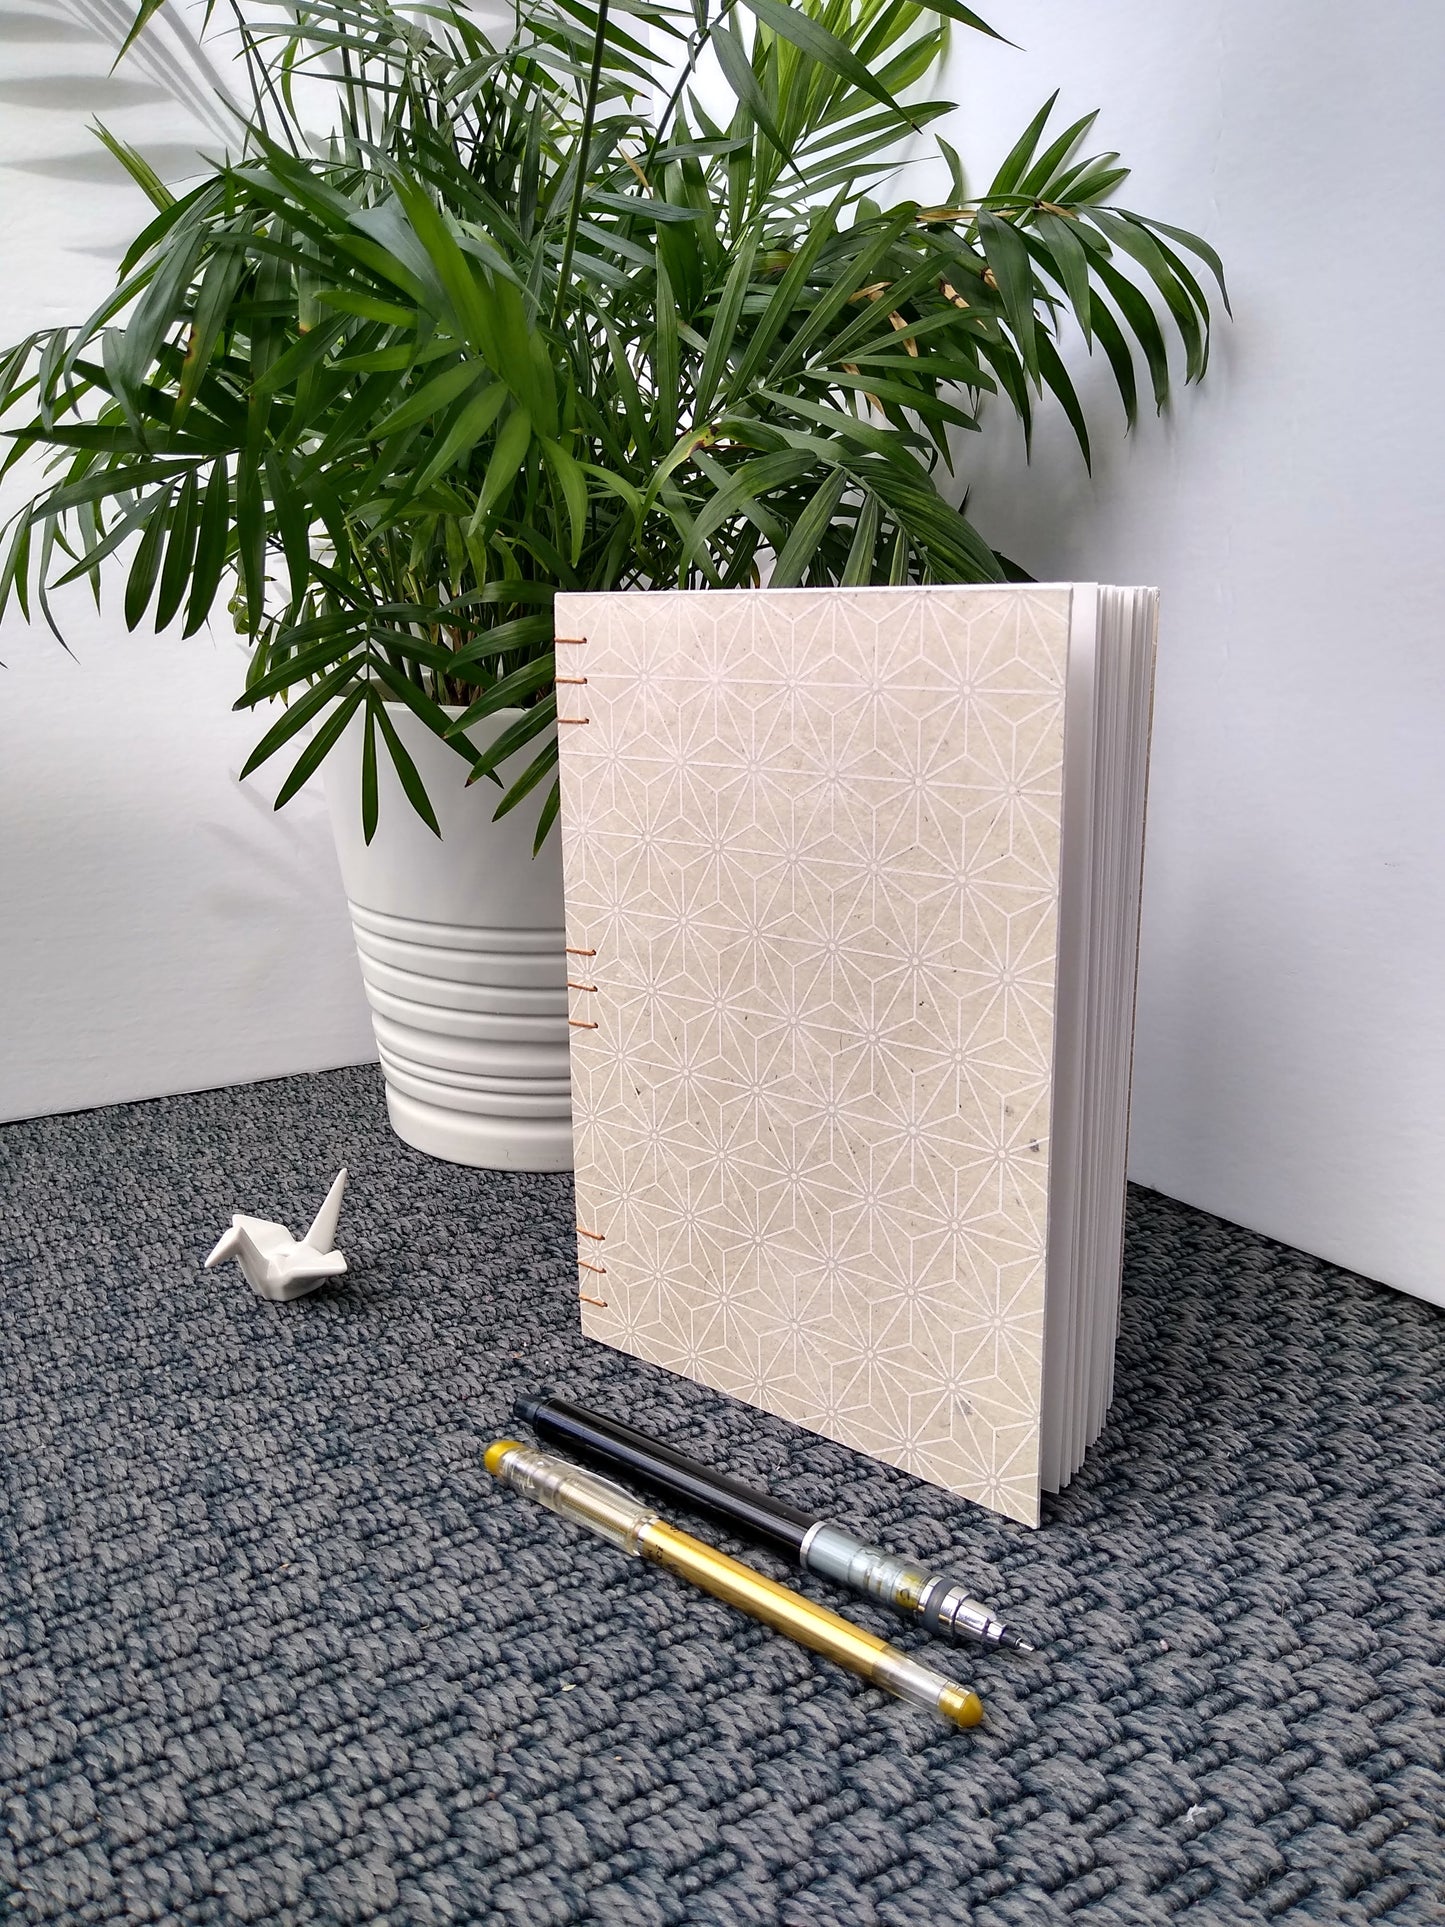 A handmade journal sits upright beside a potted plant, a ceramic crane, a gold pen, and a black mechanical pencil. The cover of the journal is cream with a white asanoha pattern on it. 